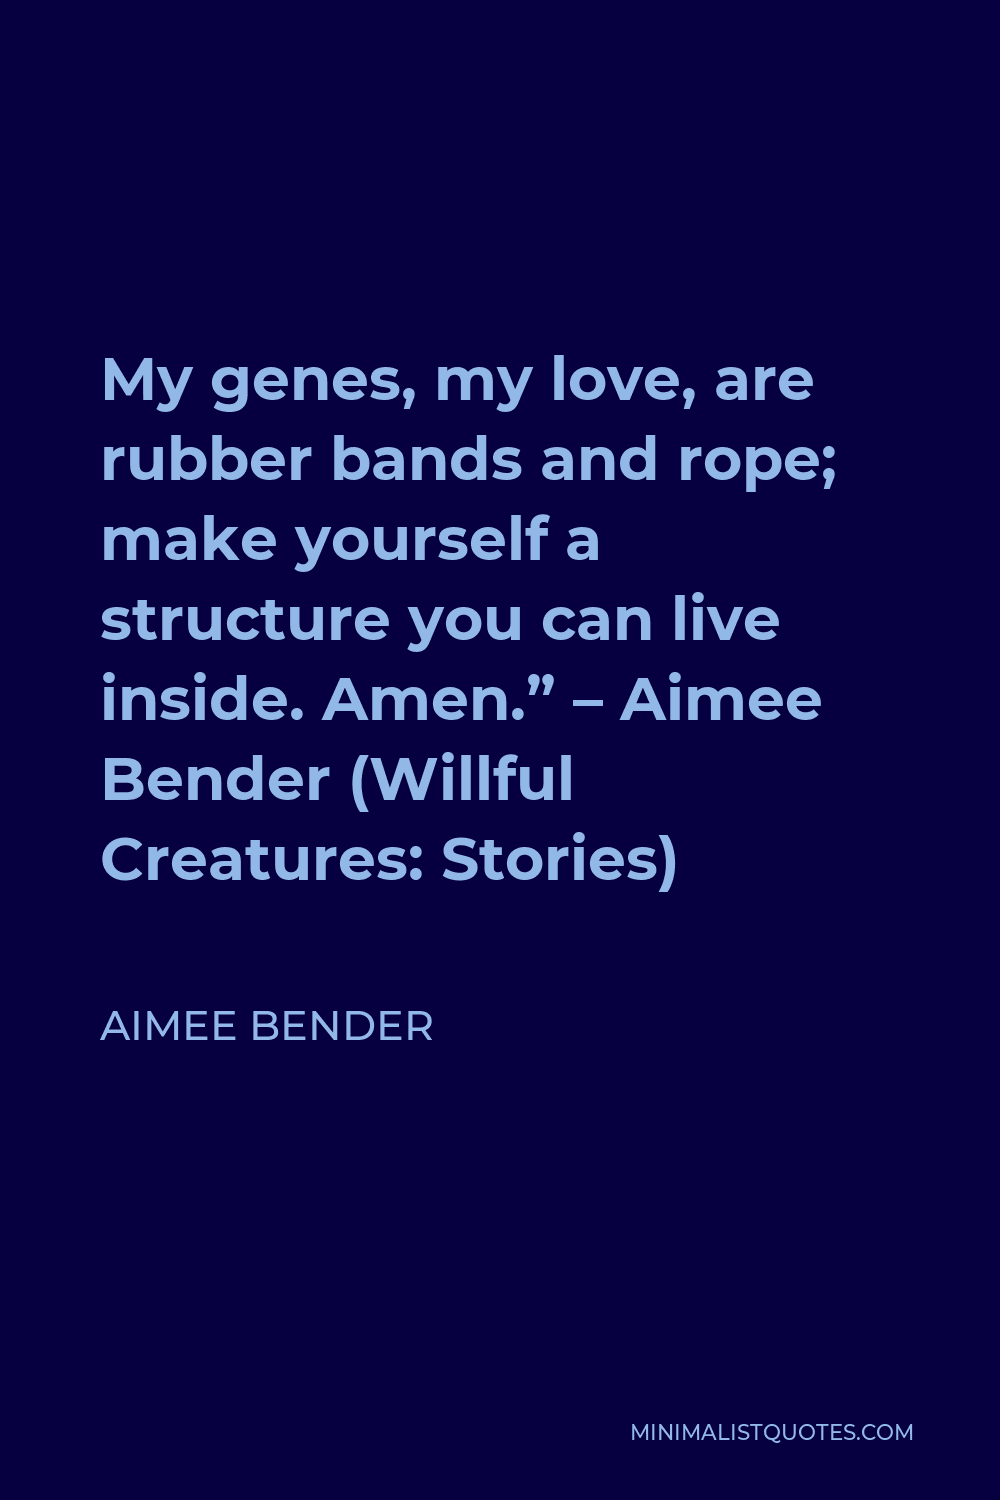 Aimee Bender Quote - My genes, my love, are rubber bands and rope; make yourself a structure you can live inside. Amen.” – Aimee Bender (Willful Creatures: Stories)